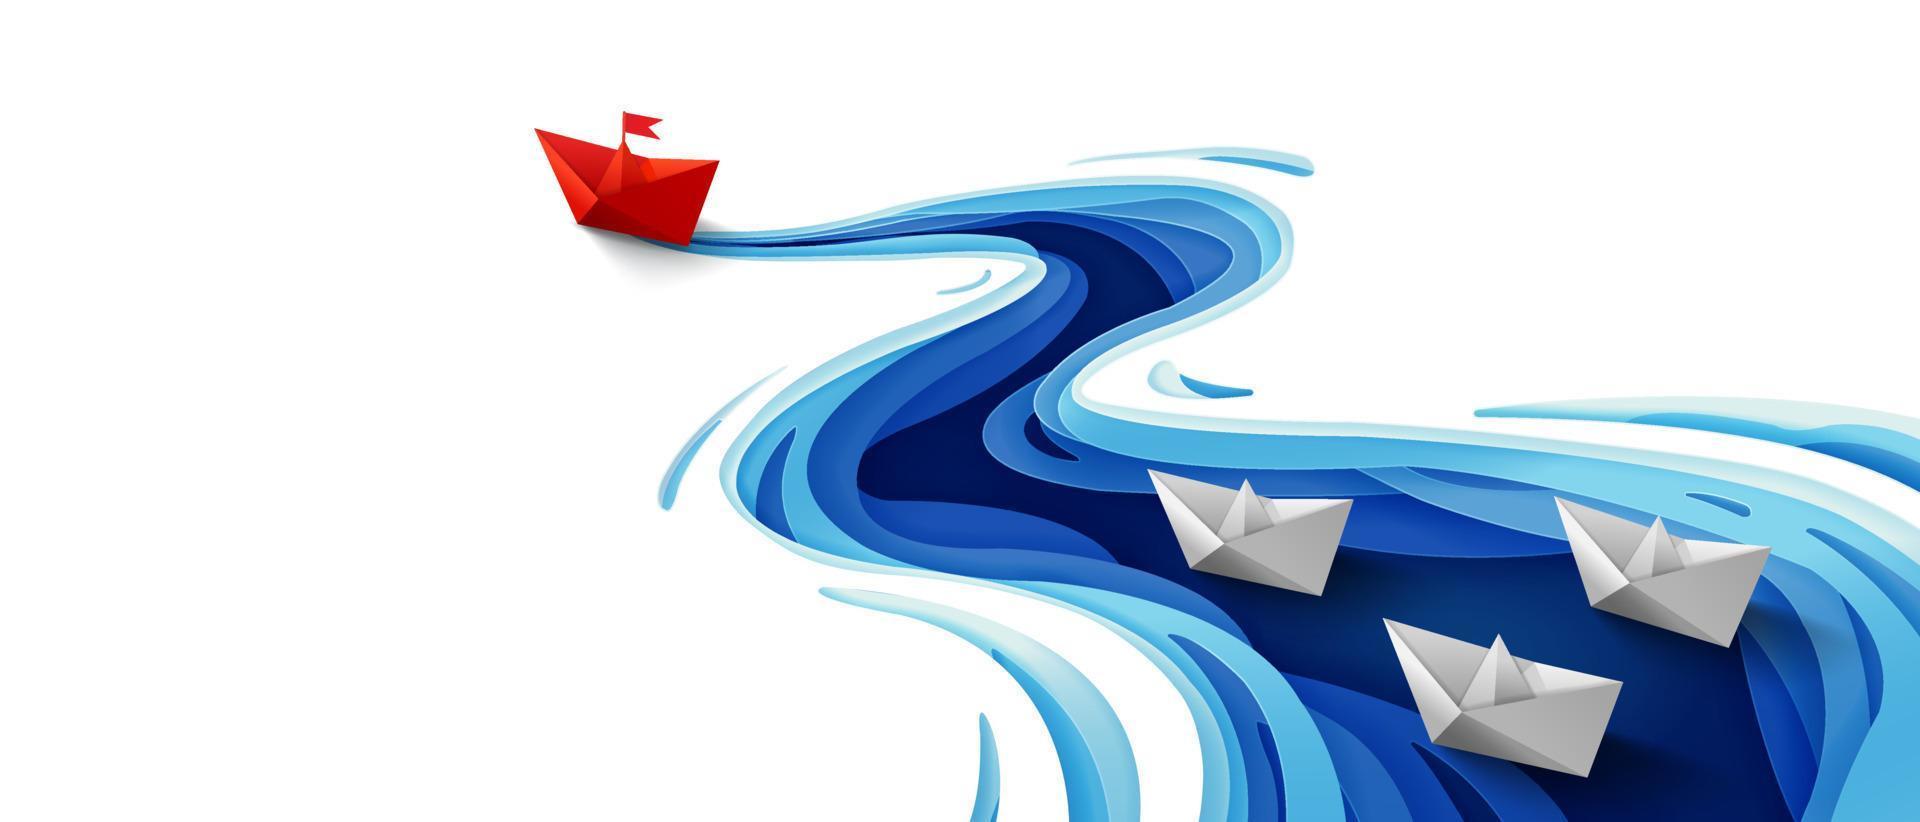 Success leadership concept, Origami red paper boat floating in front of white paper boats on winding blue river, Paper art design banner background vector